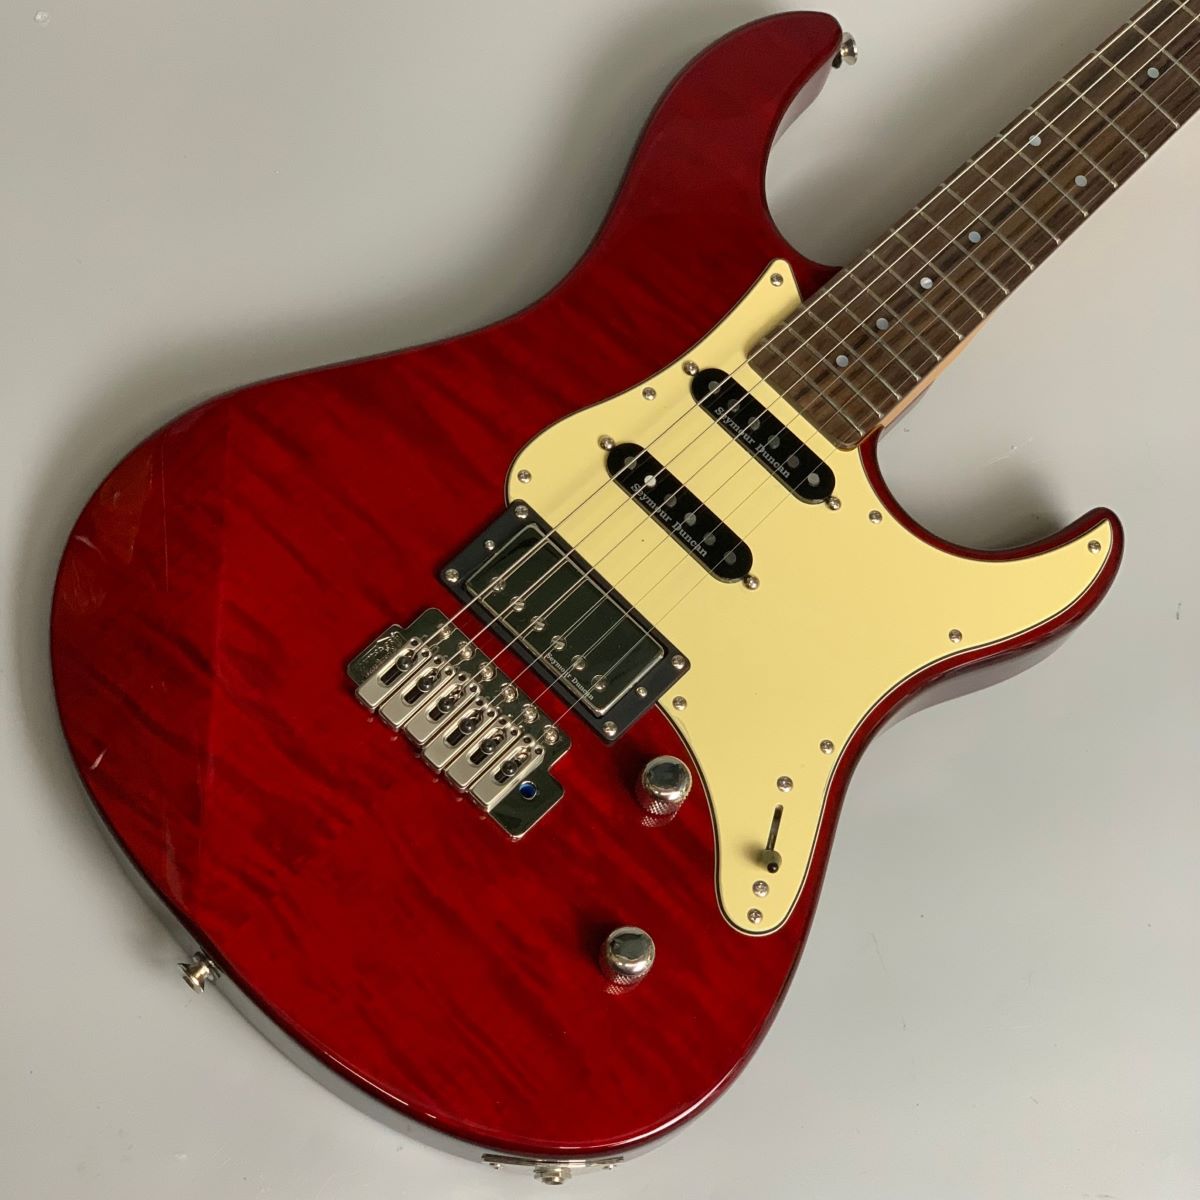 YAMAHA PACIFICA612VIIFMX Fired Red エレキギターパシフィカ ヤマハ ...